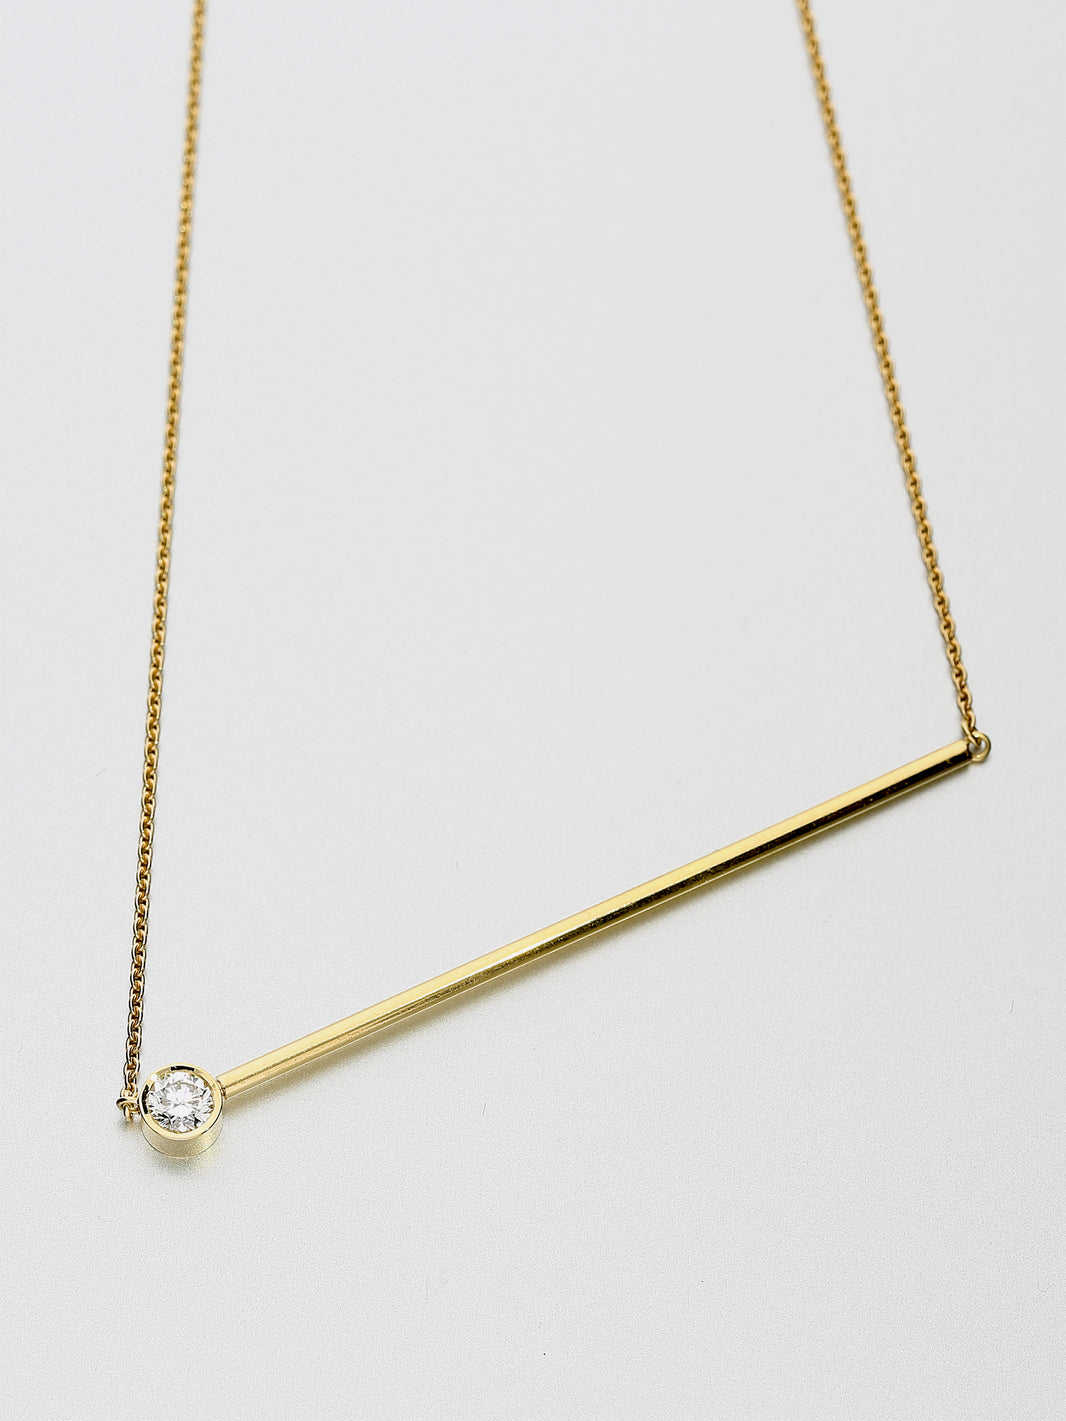 Abacus large brilliant diamond Necklace, Yellow gold